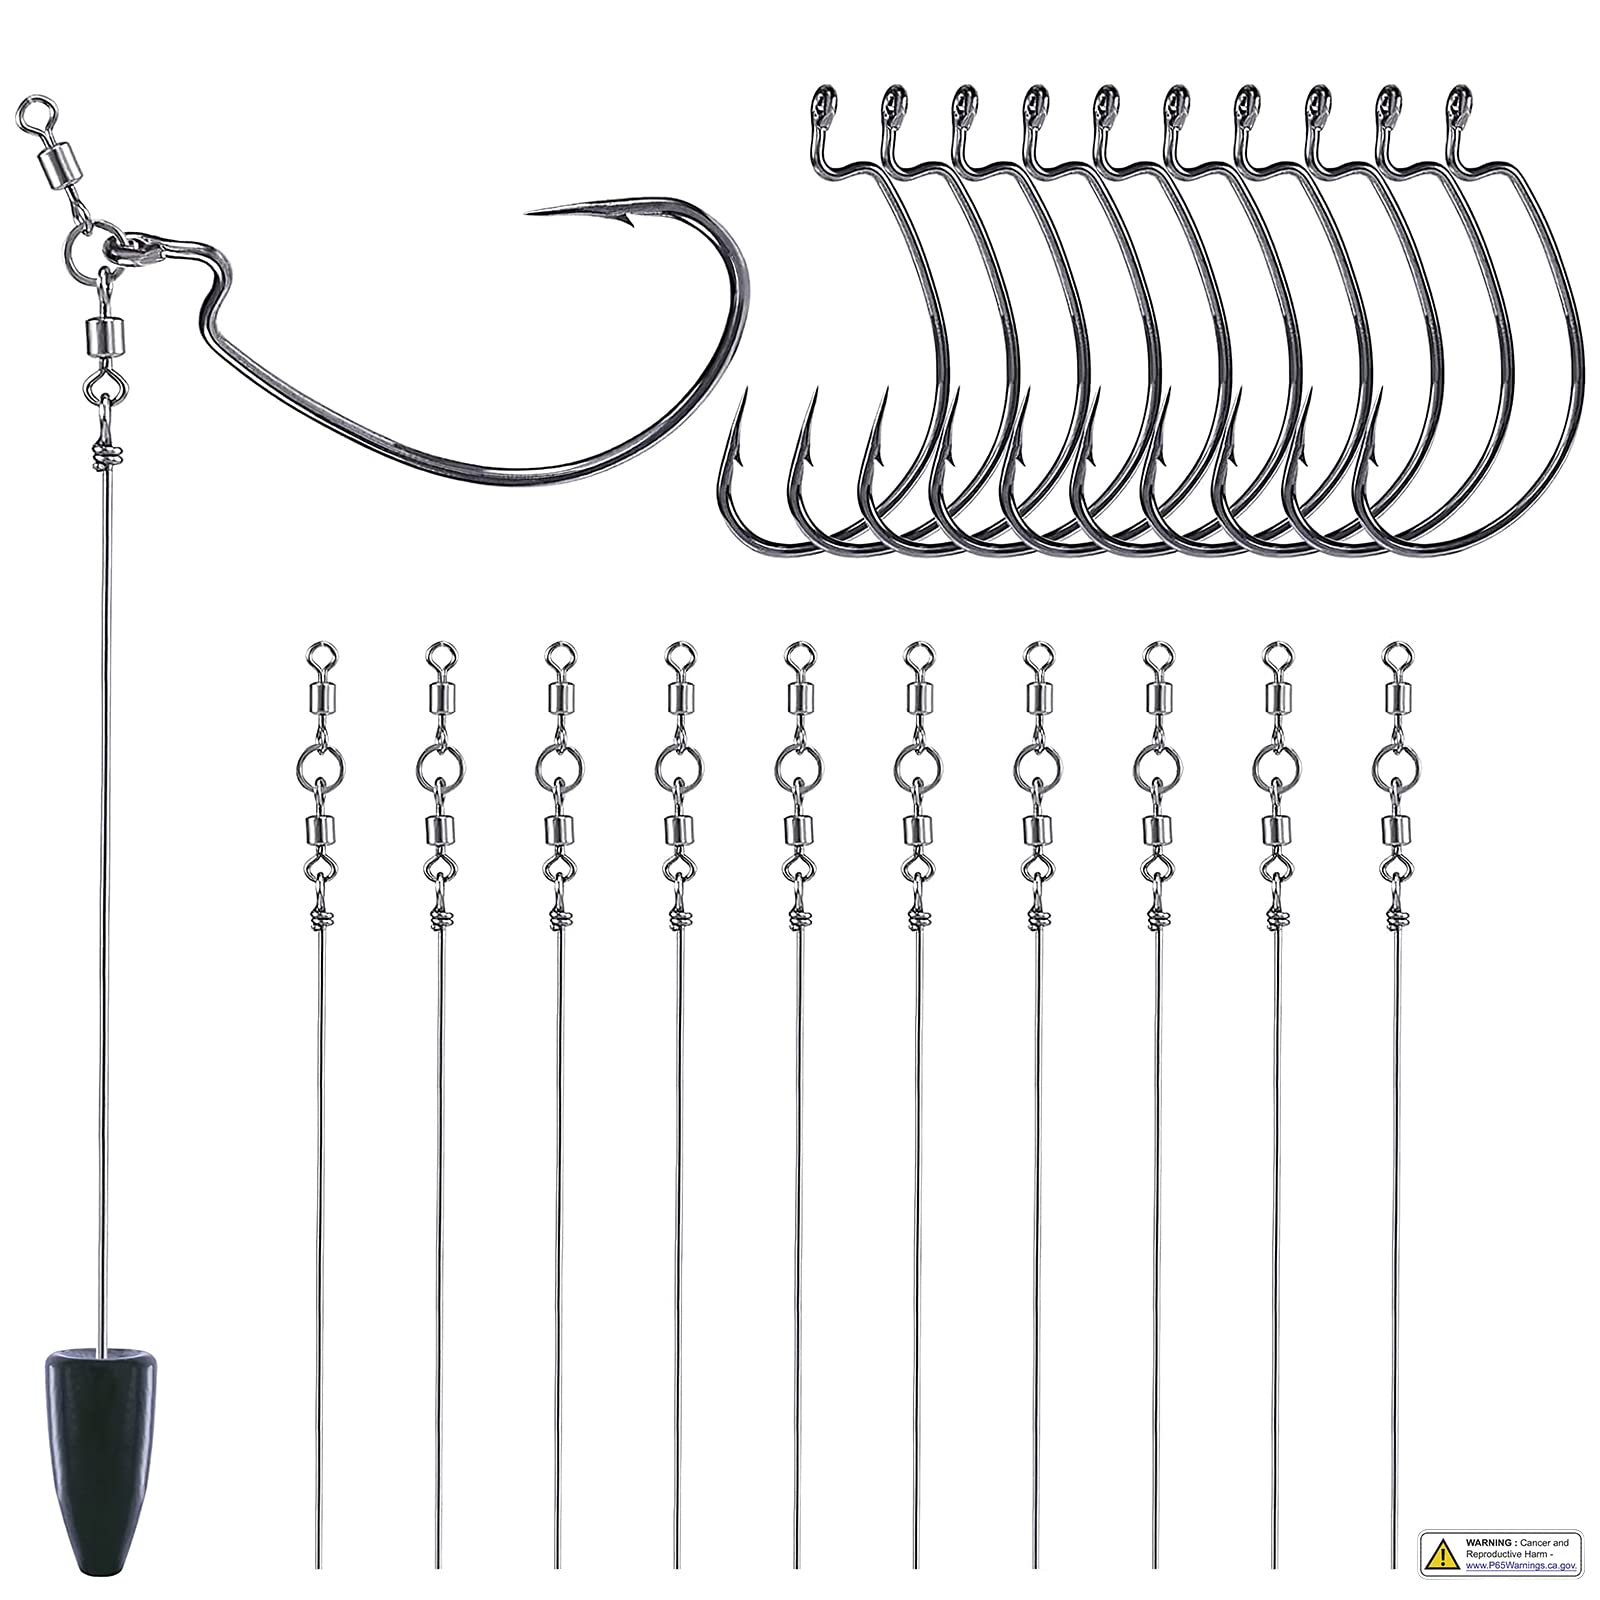 PLUSINNO Fishing Accessories Kit, Fishing Tackle Kit with Tackle Box  Including Fishing Weights Sinkers, Jig Hooks, Beads, Swivel Snap, Bobbers  Float, Saltwater Freshwater Fishing Gear 10pcs Fishing Hook Kit